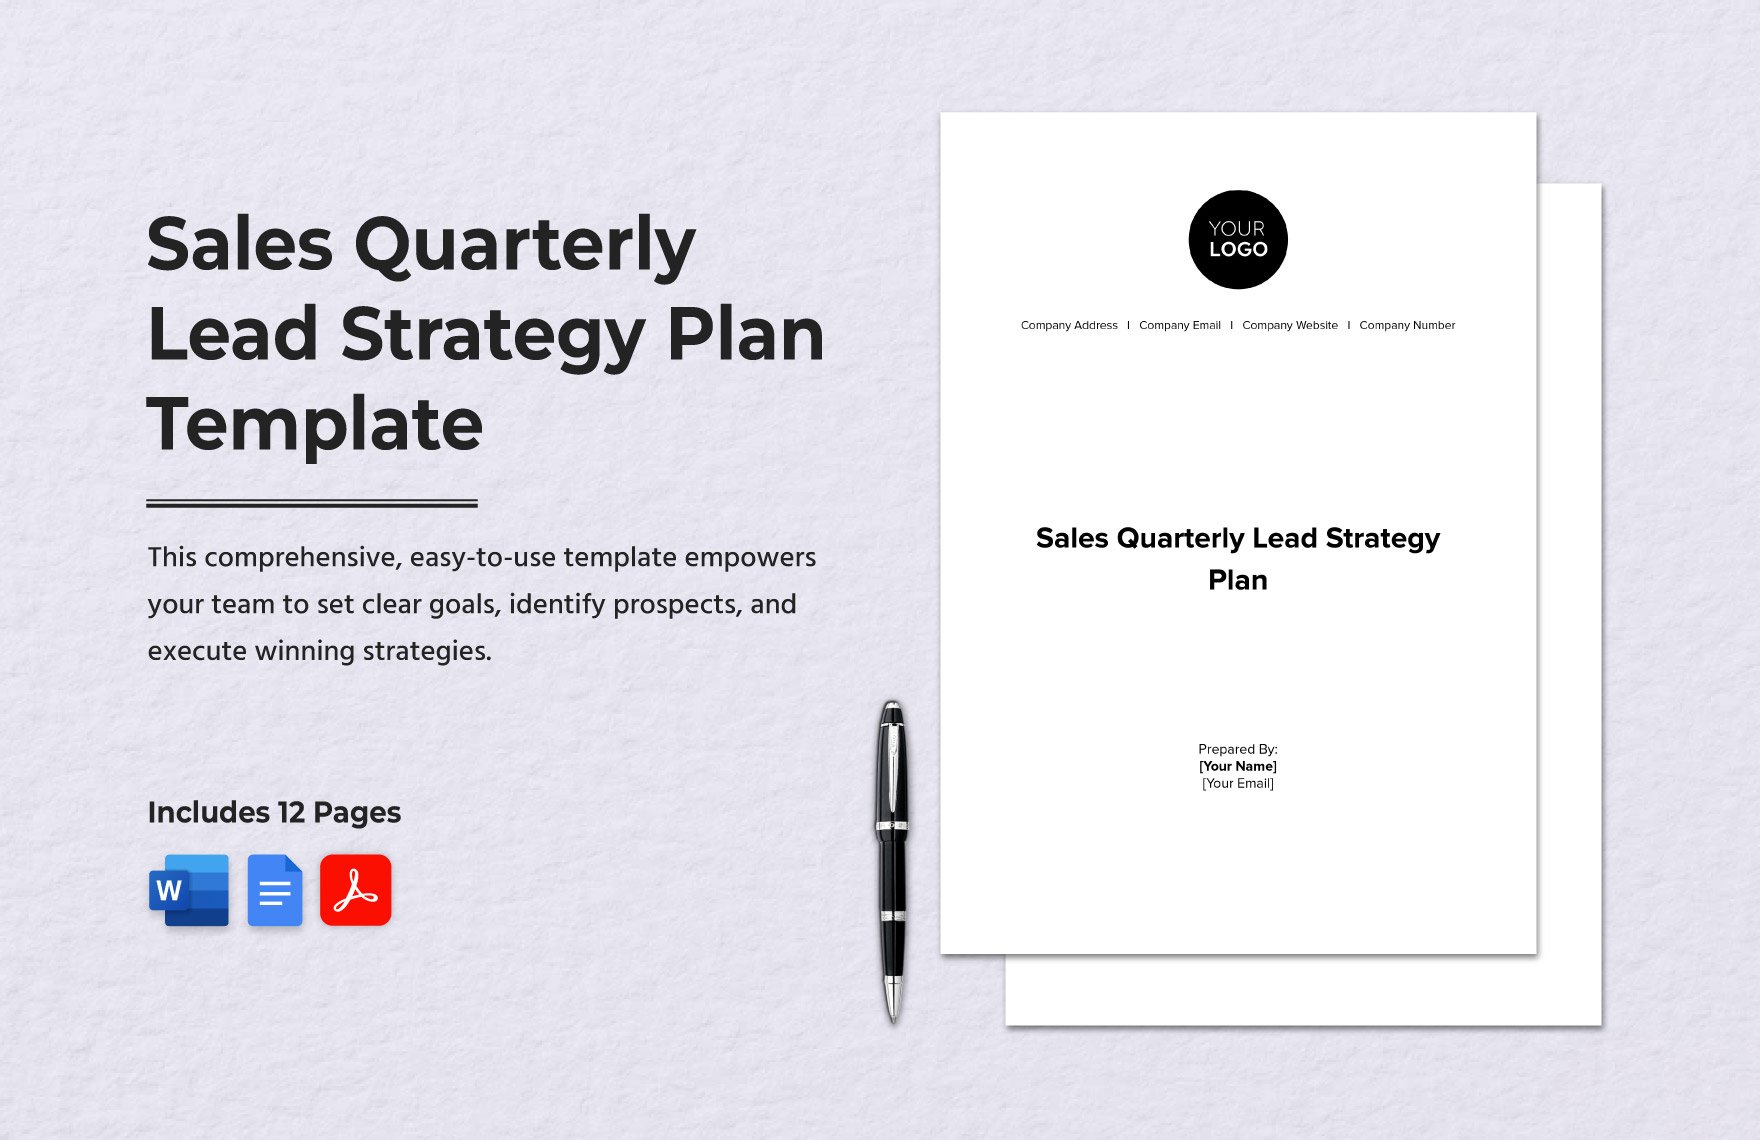 Sales Quarterly Lead Strategy Plan Template in Word, Google Docs, PDF